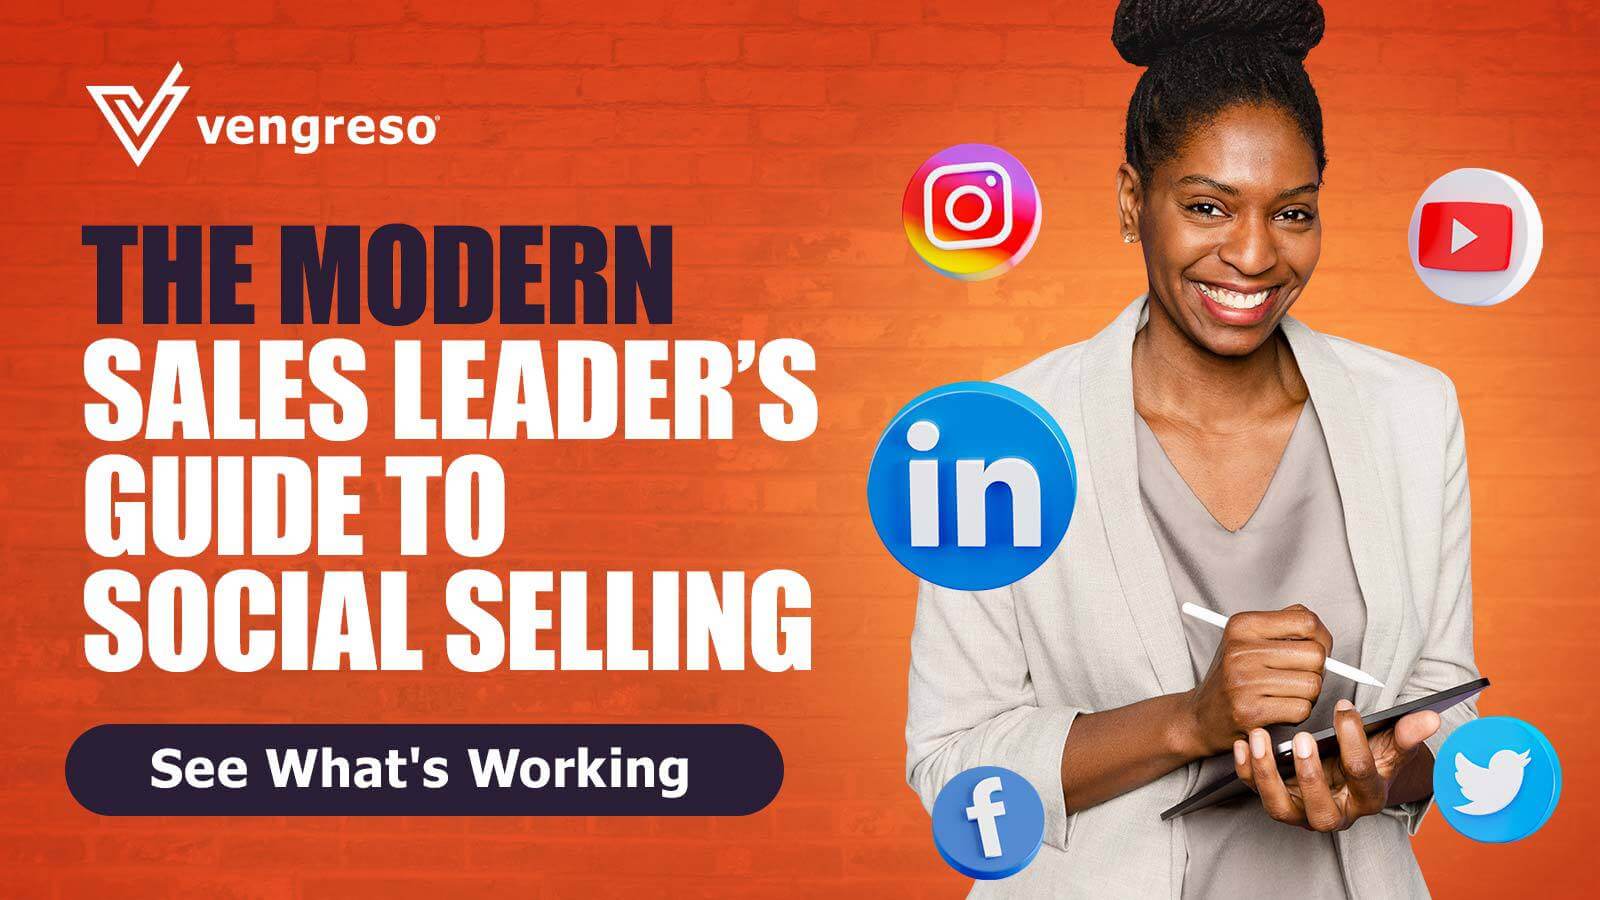 The Modern Sales Leader’s Guide to Social Selling